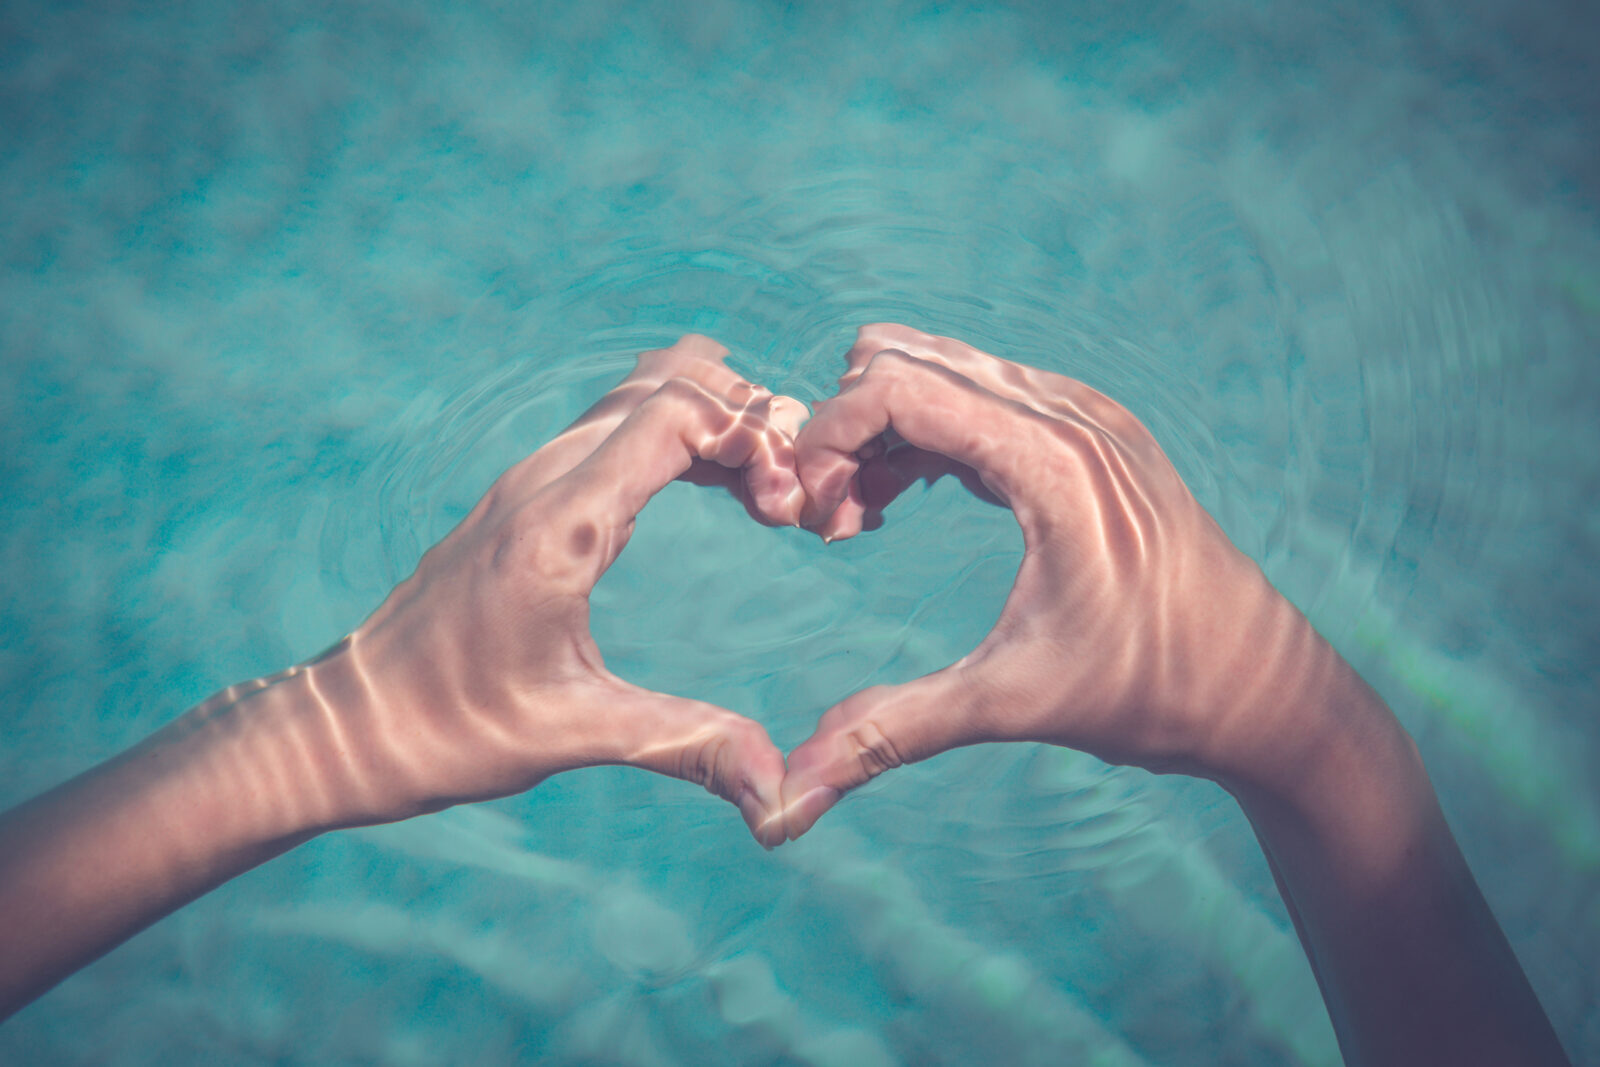 A picture of hands forming a heart over a body of water, for an LCA post on showing your water love on Valentine's Day.